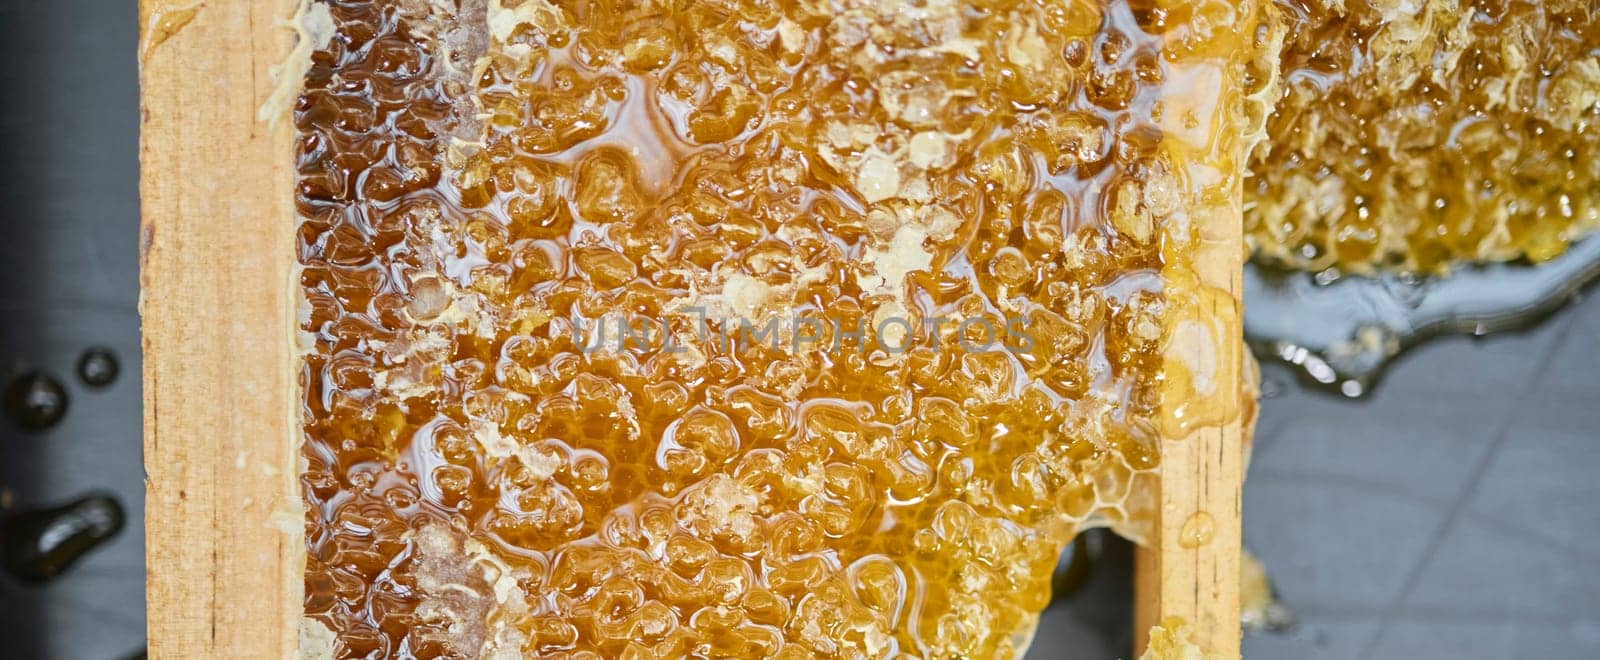 Honey, natural and product, liquid and gold with beekeeping, farming and production process. Agriculture, bee farming and food texture, sweet syrup zoom and honeycomb with wood frame and healthy